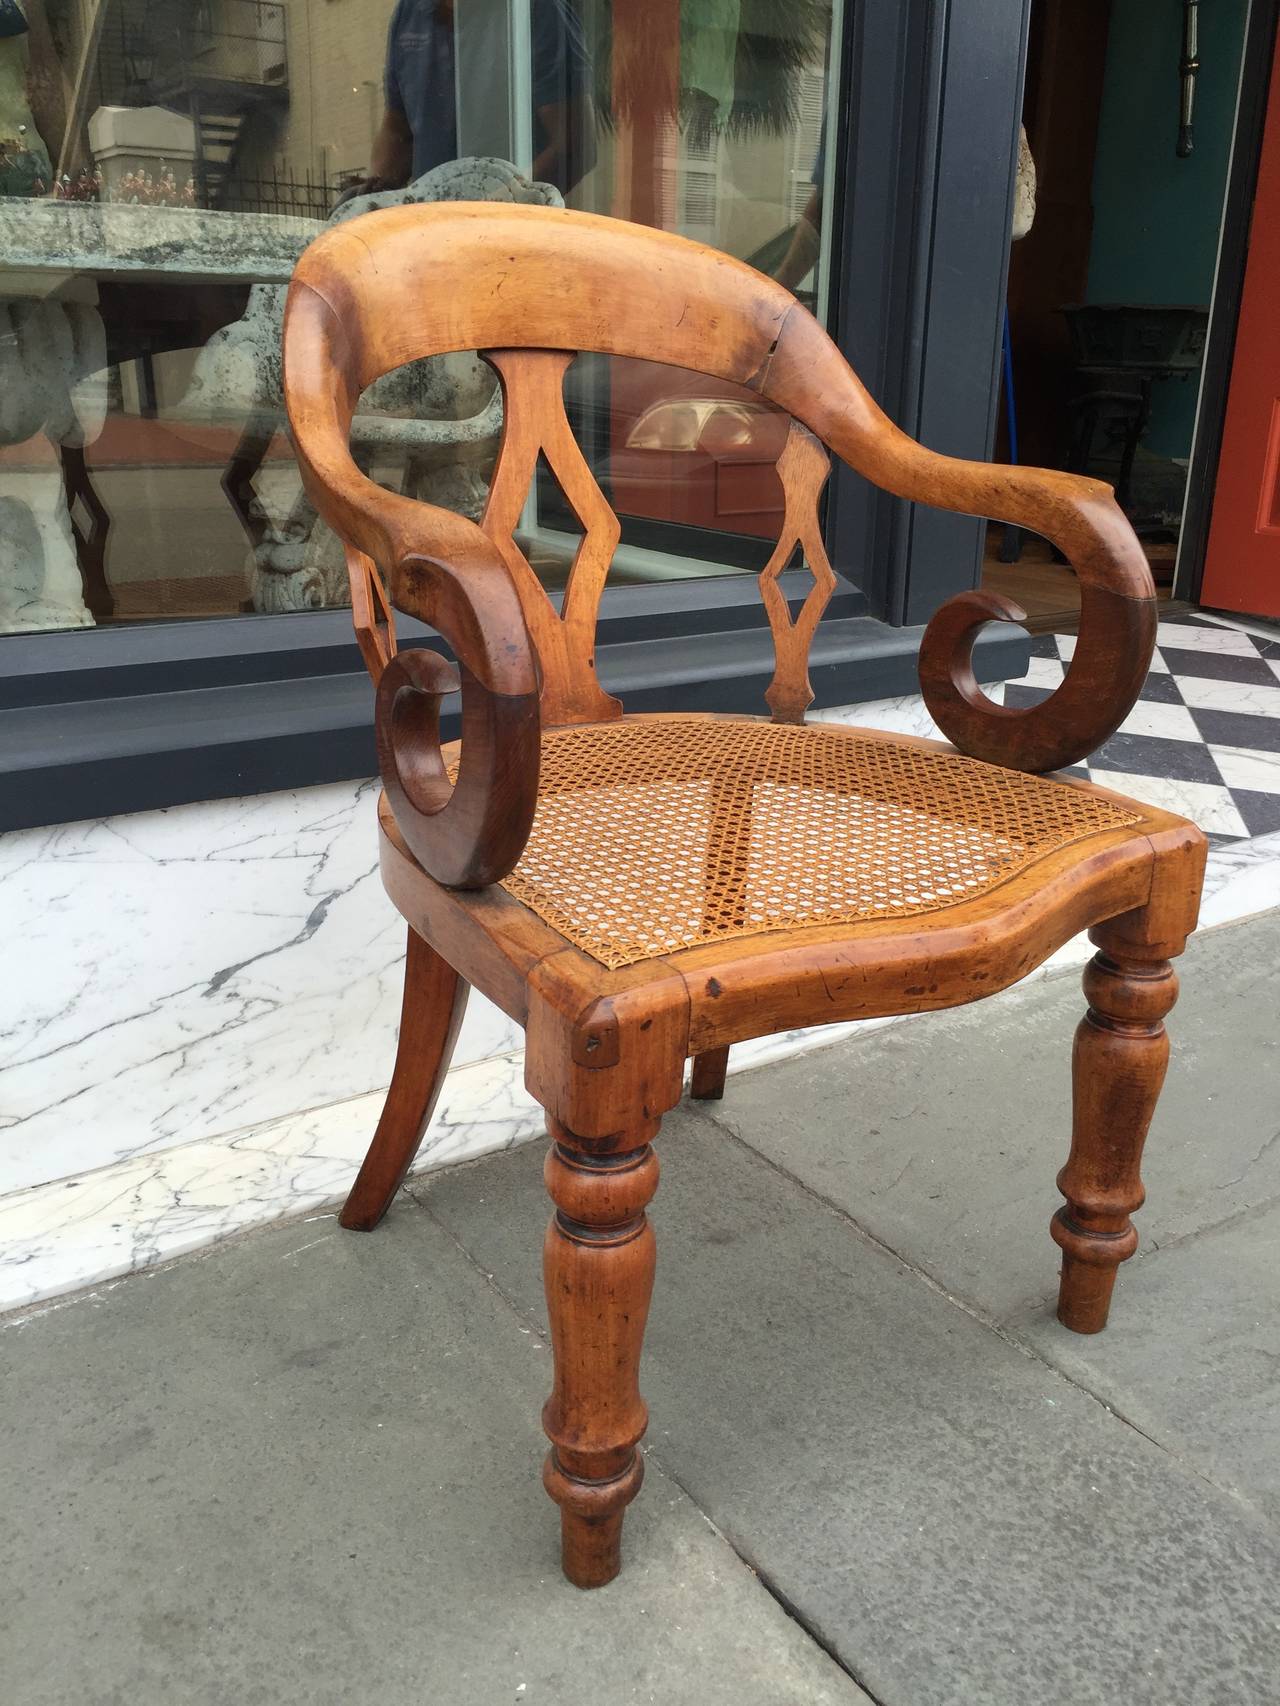 Great Britain (UK) 19th century English walnut with cane bottom arm chair